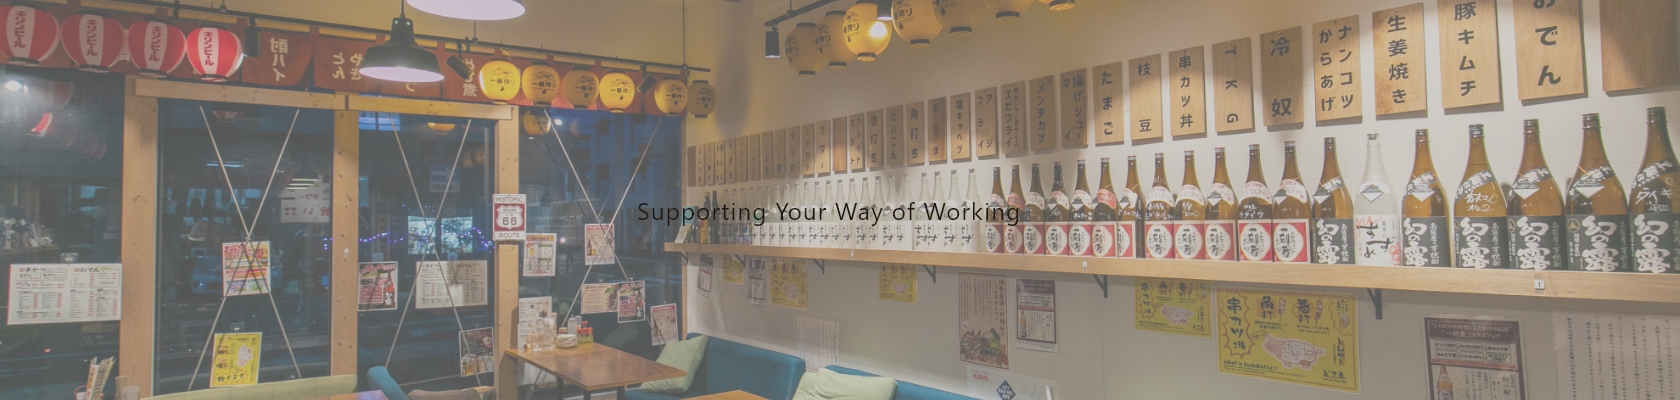 Supporting Your Way of Working